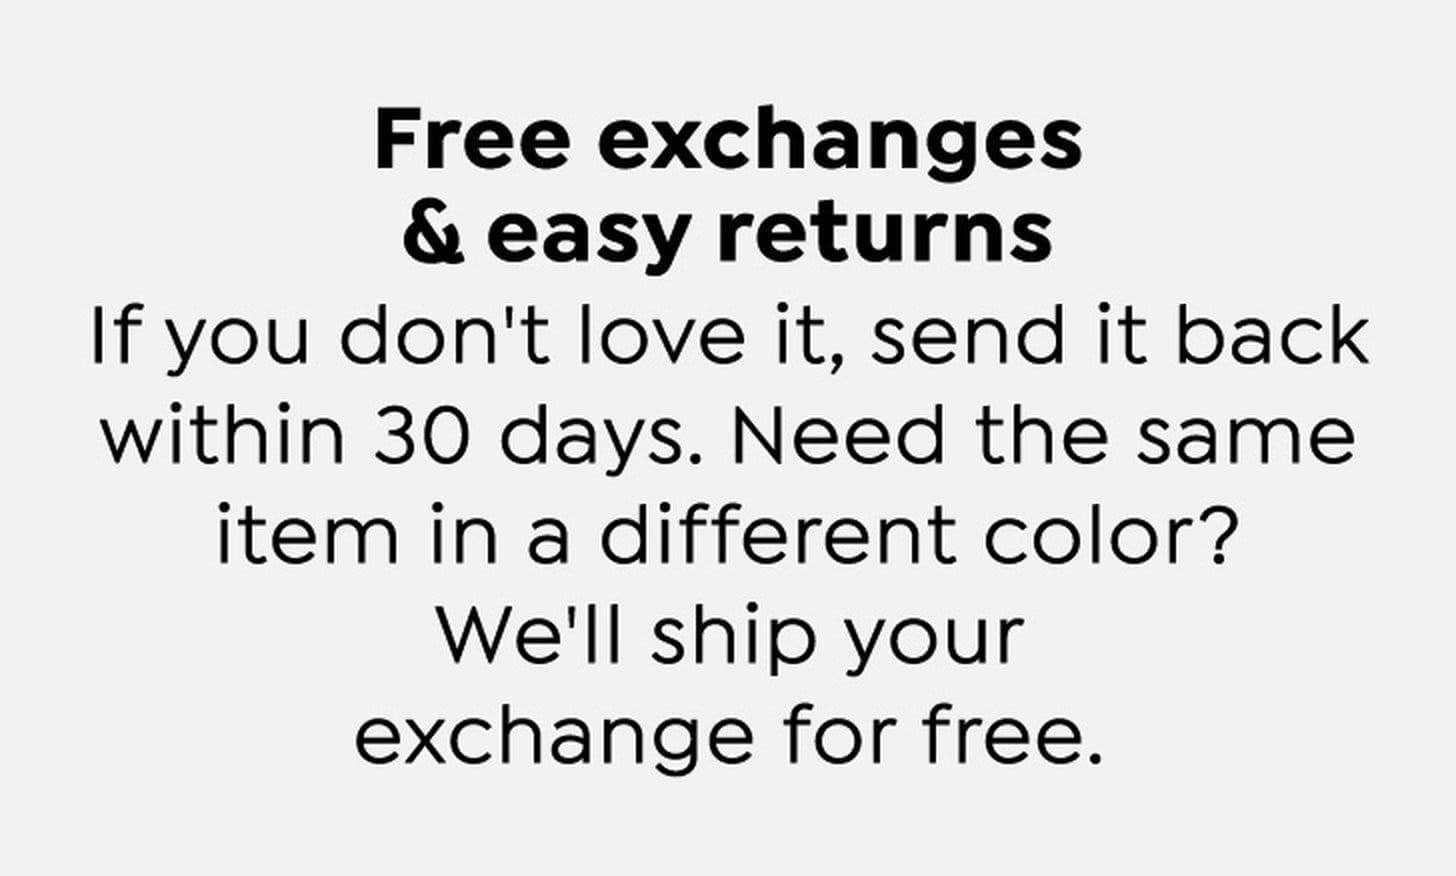 Free exchanges and easy returns. If you don't love it, send it back within 30 days. Need the same item in a different color? We'll ship your exchange for free.